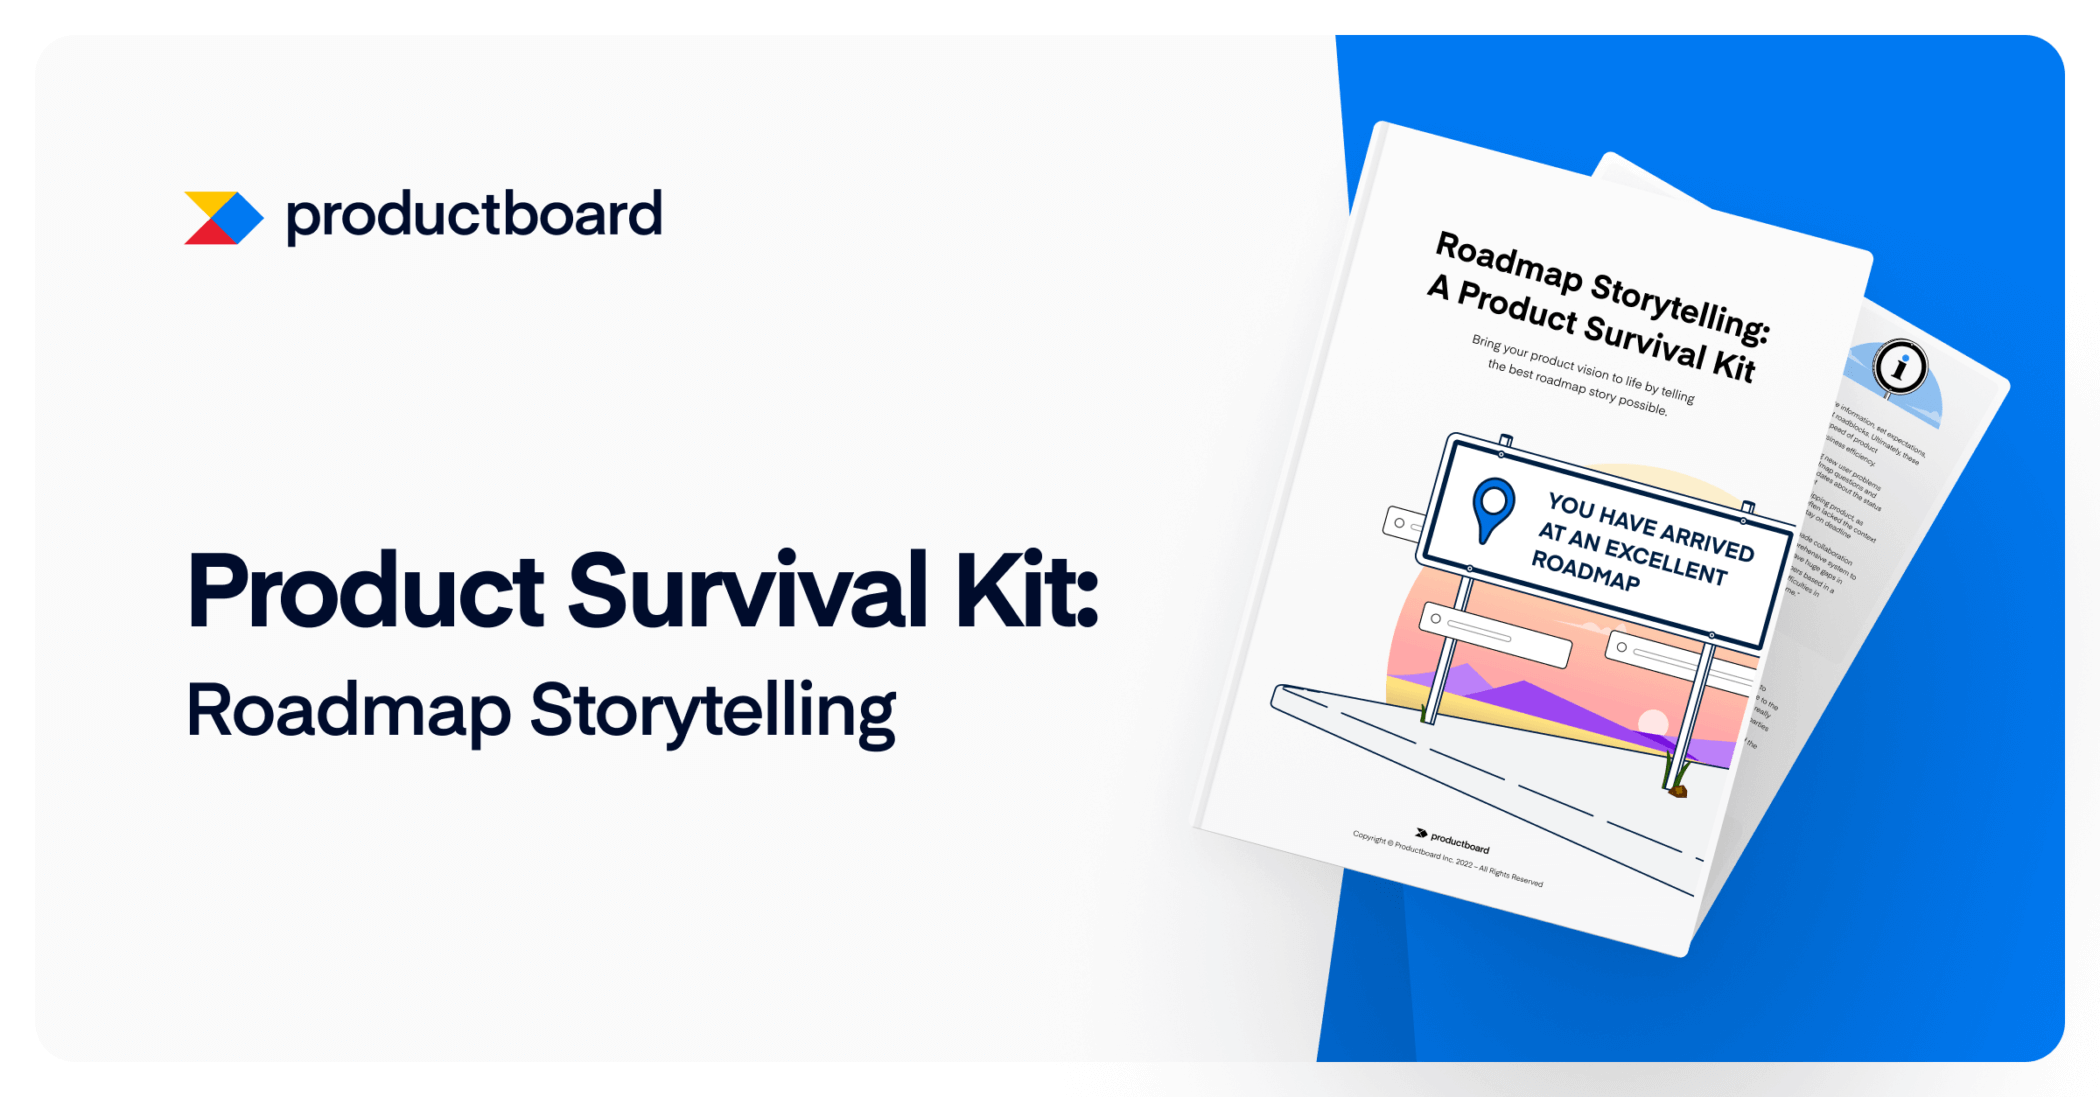 4 easy steps to become a master roadmap storyteller